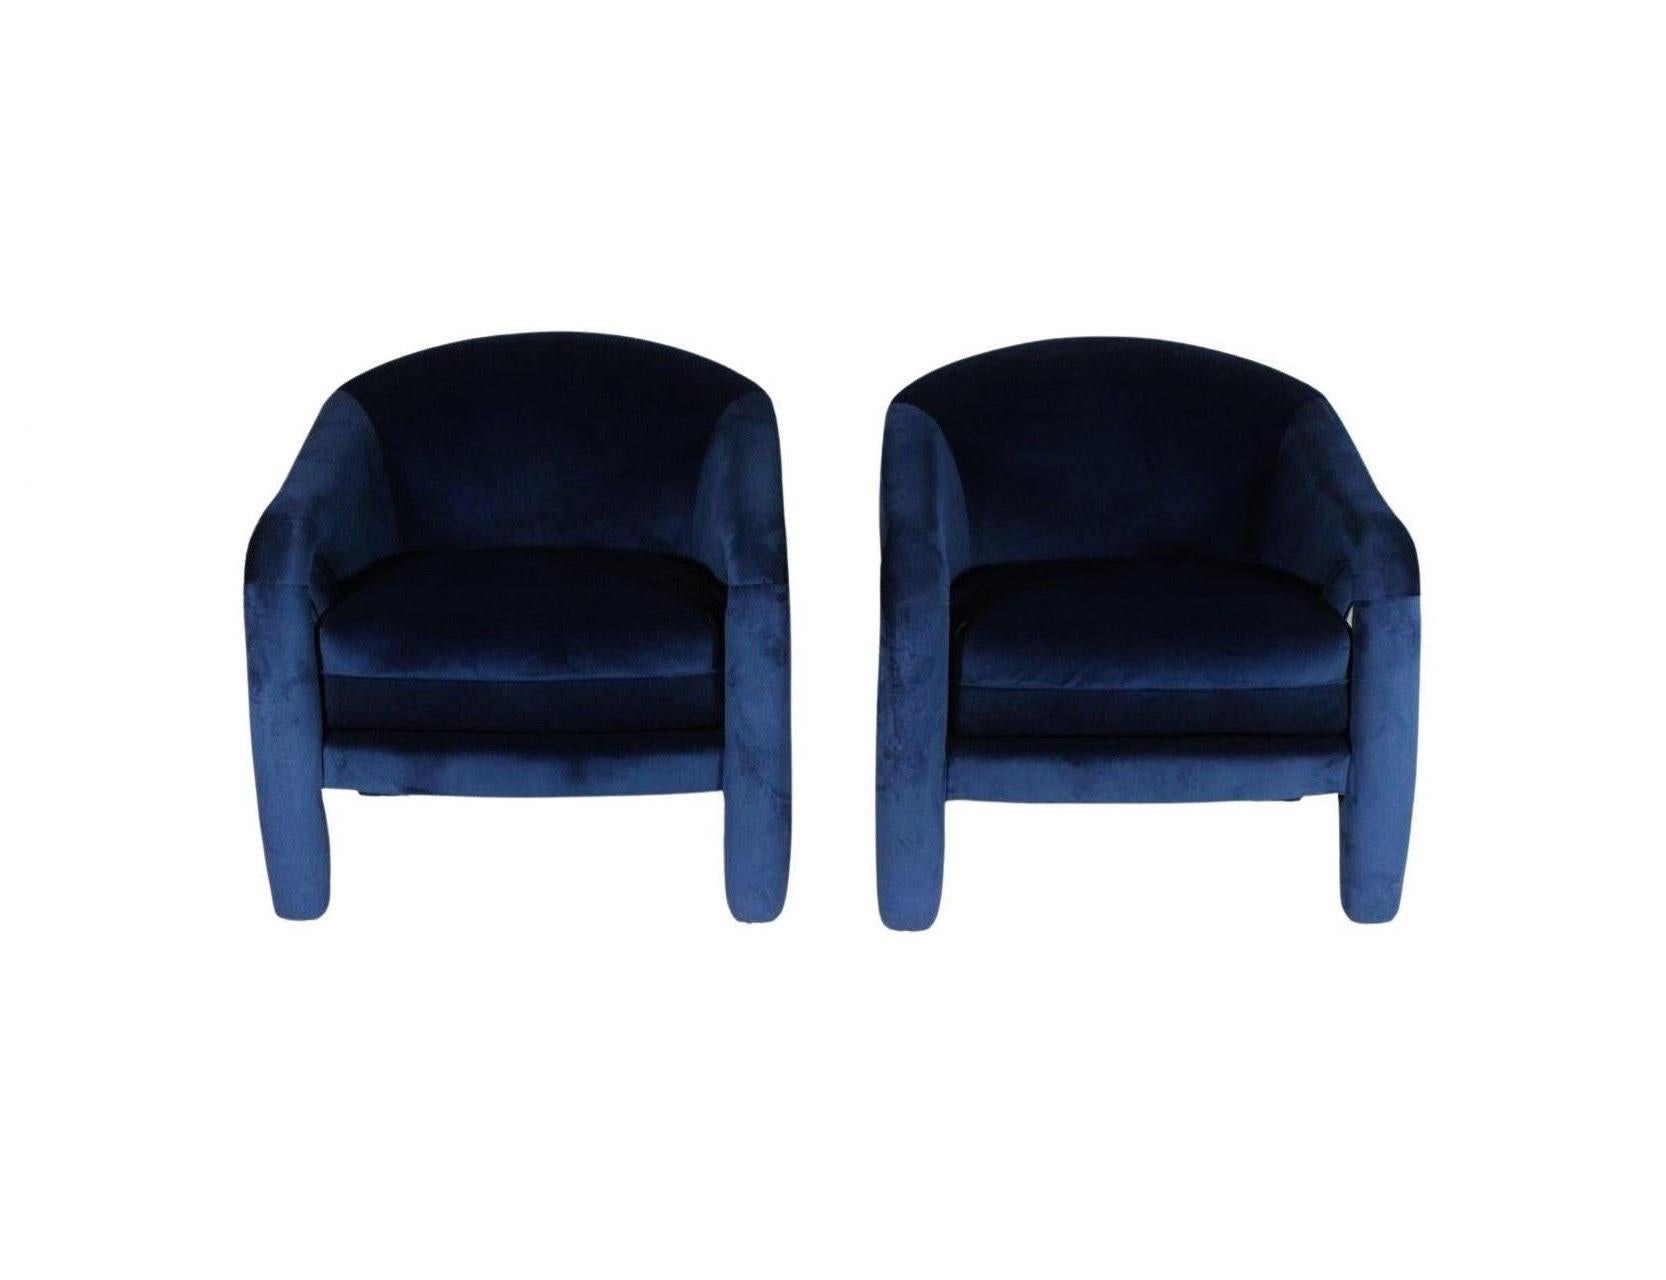 These navy-blue chairs inspired by the iconic designer Vladimir Kagan, are bold and eye-catching that will add a pop of color and visual interest to any room. Echoing modernity through their sensuous curves and swooping lines, highlighting an open